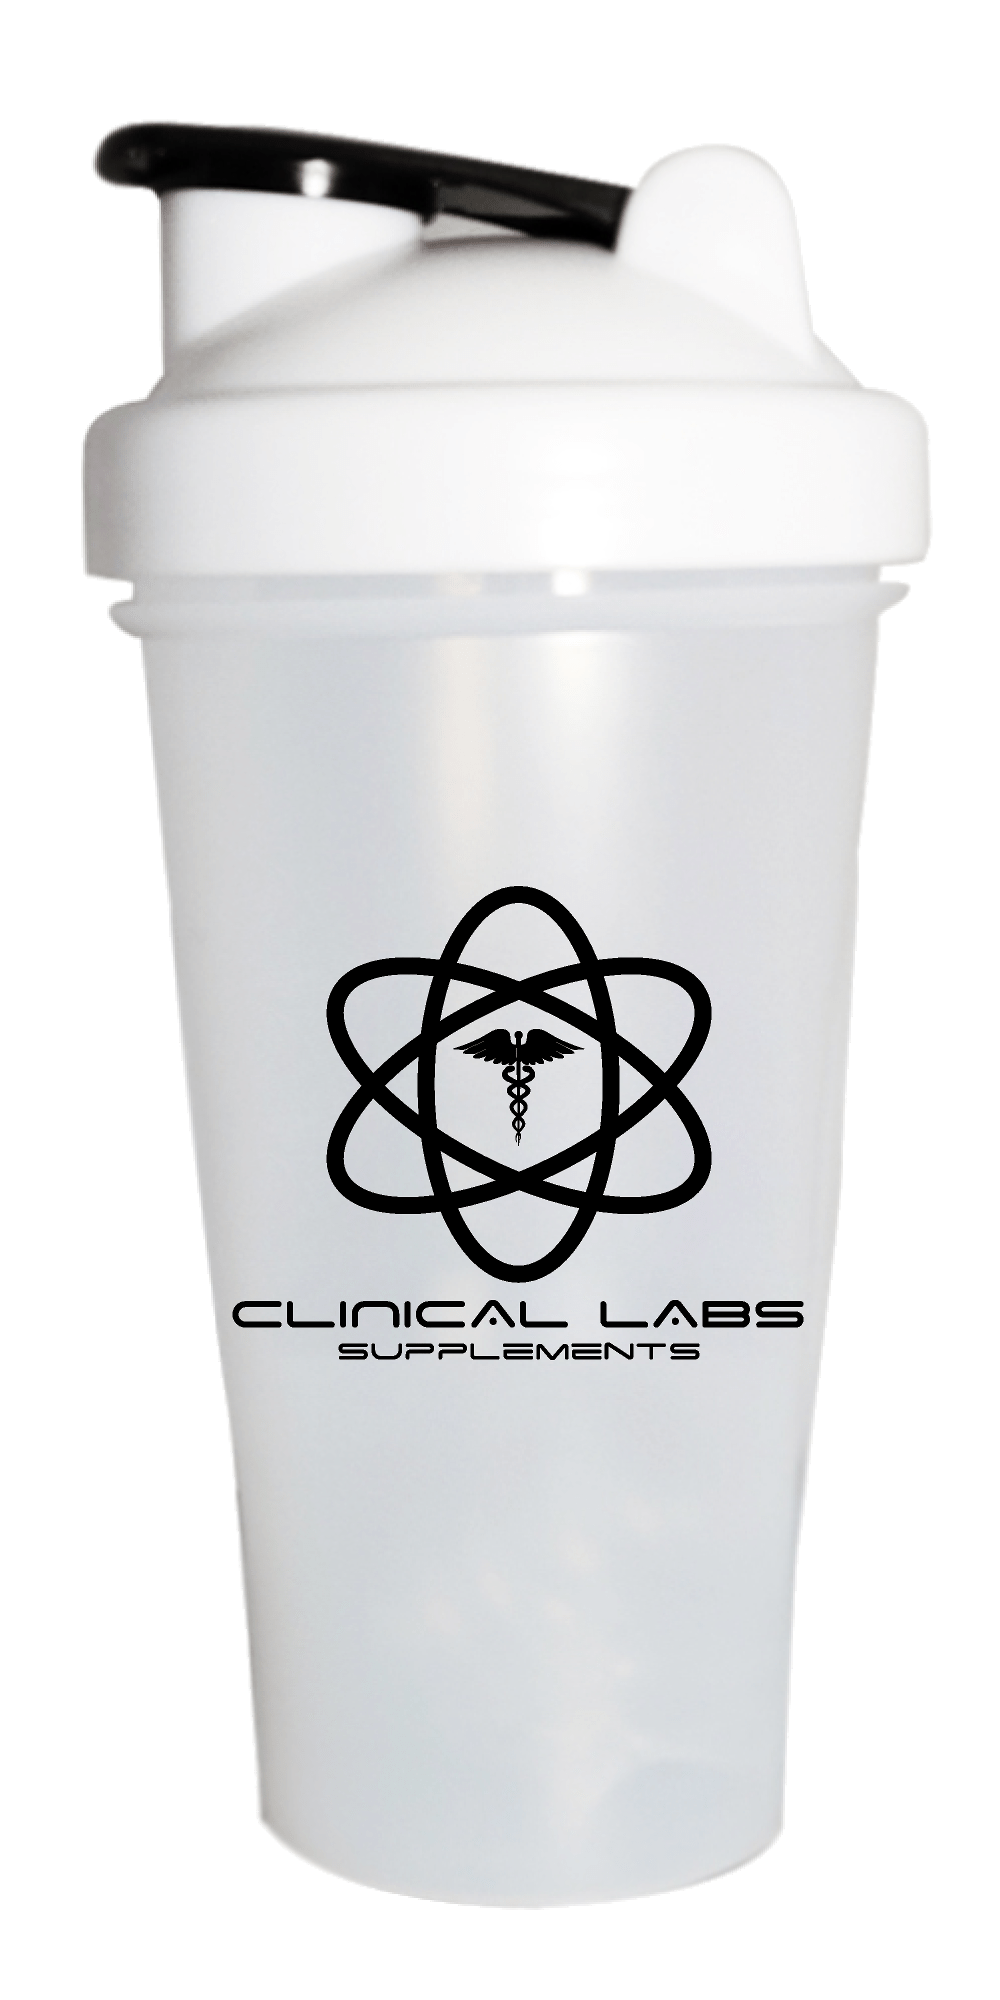 Clear Shaker Bottle - Clinical Labs Supplements